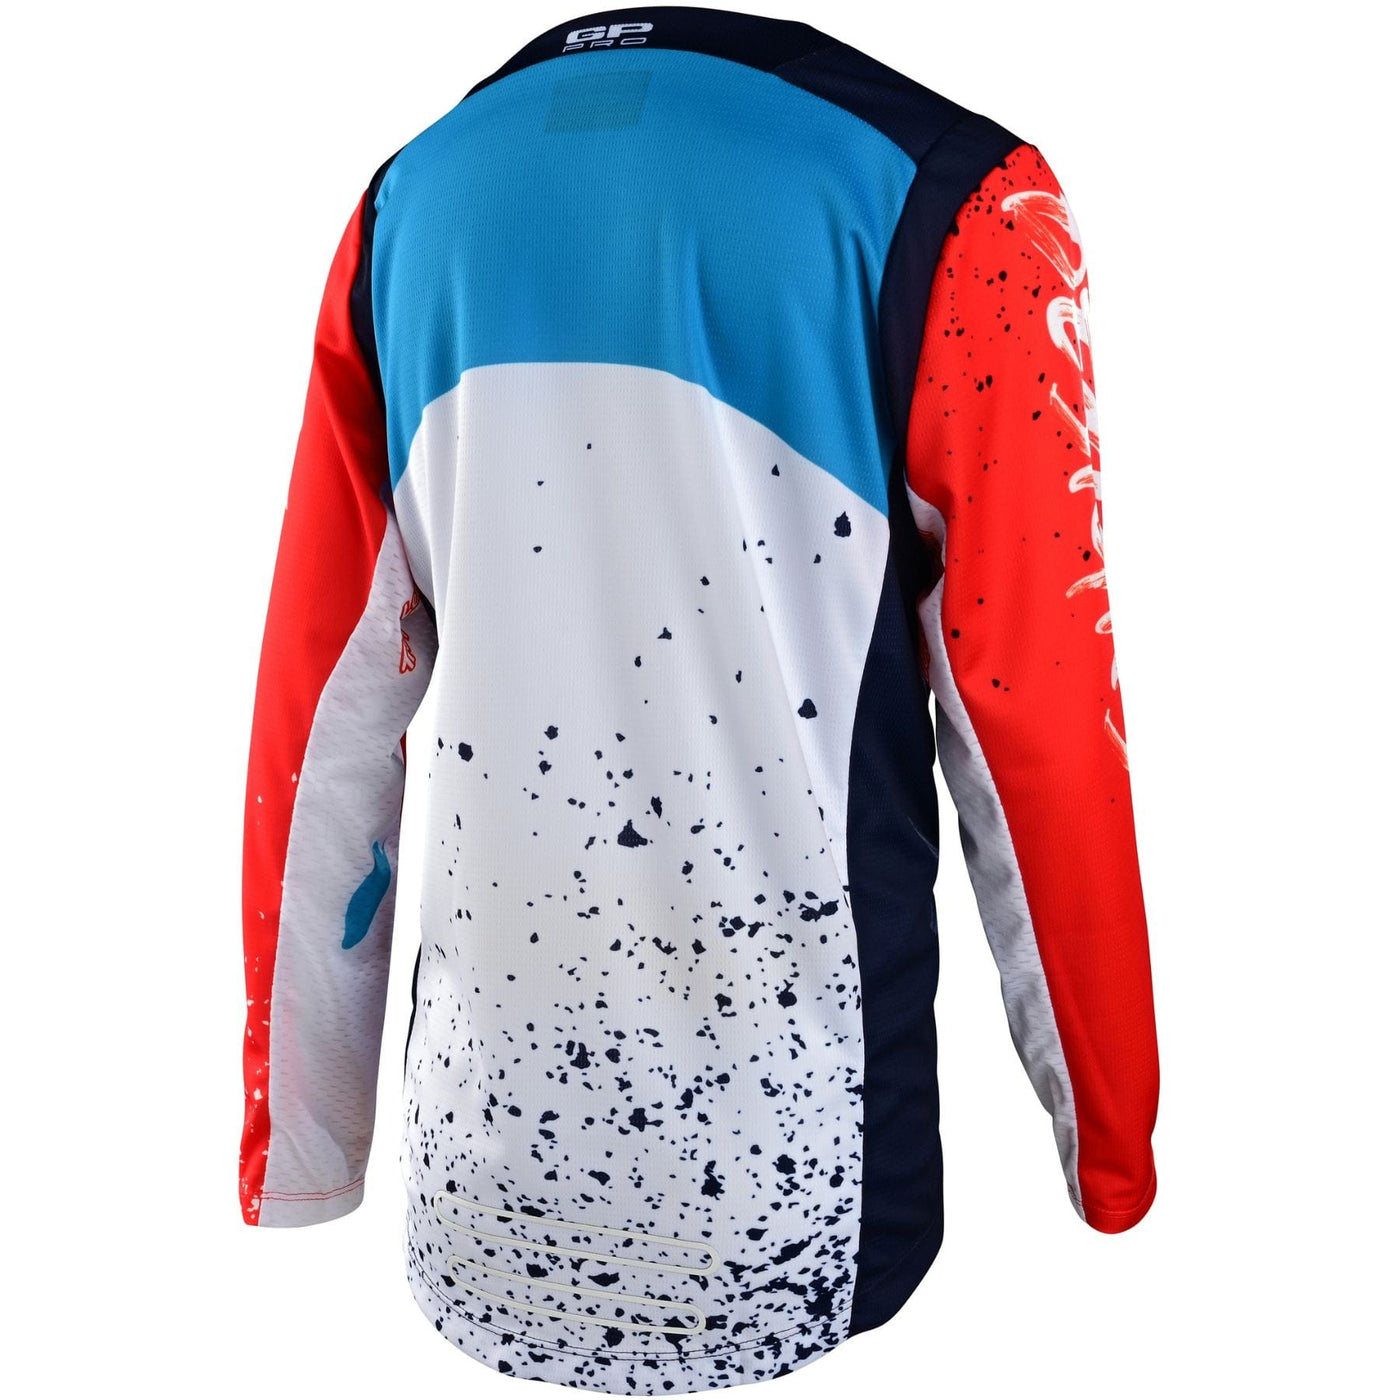 Troy Lee Designs GP PRO Youth Jersey Partical - Navy/Orange 8Lines Shop - Fast Shipping